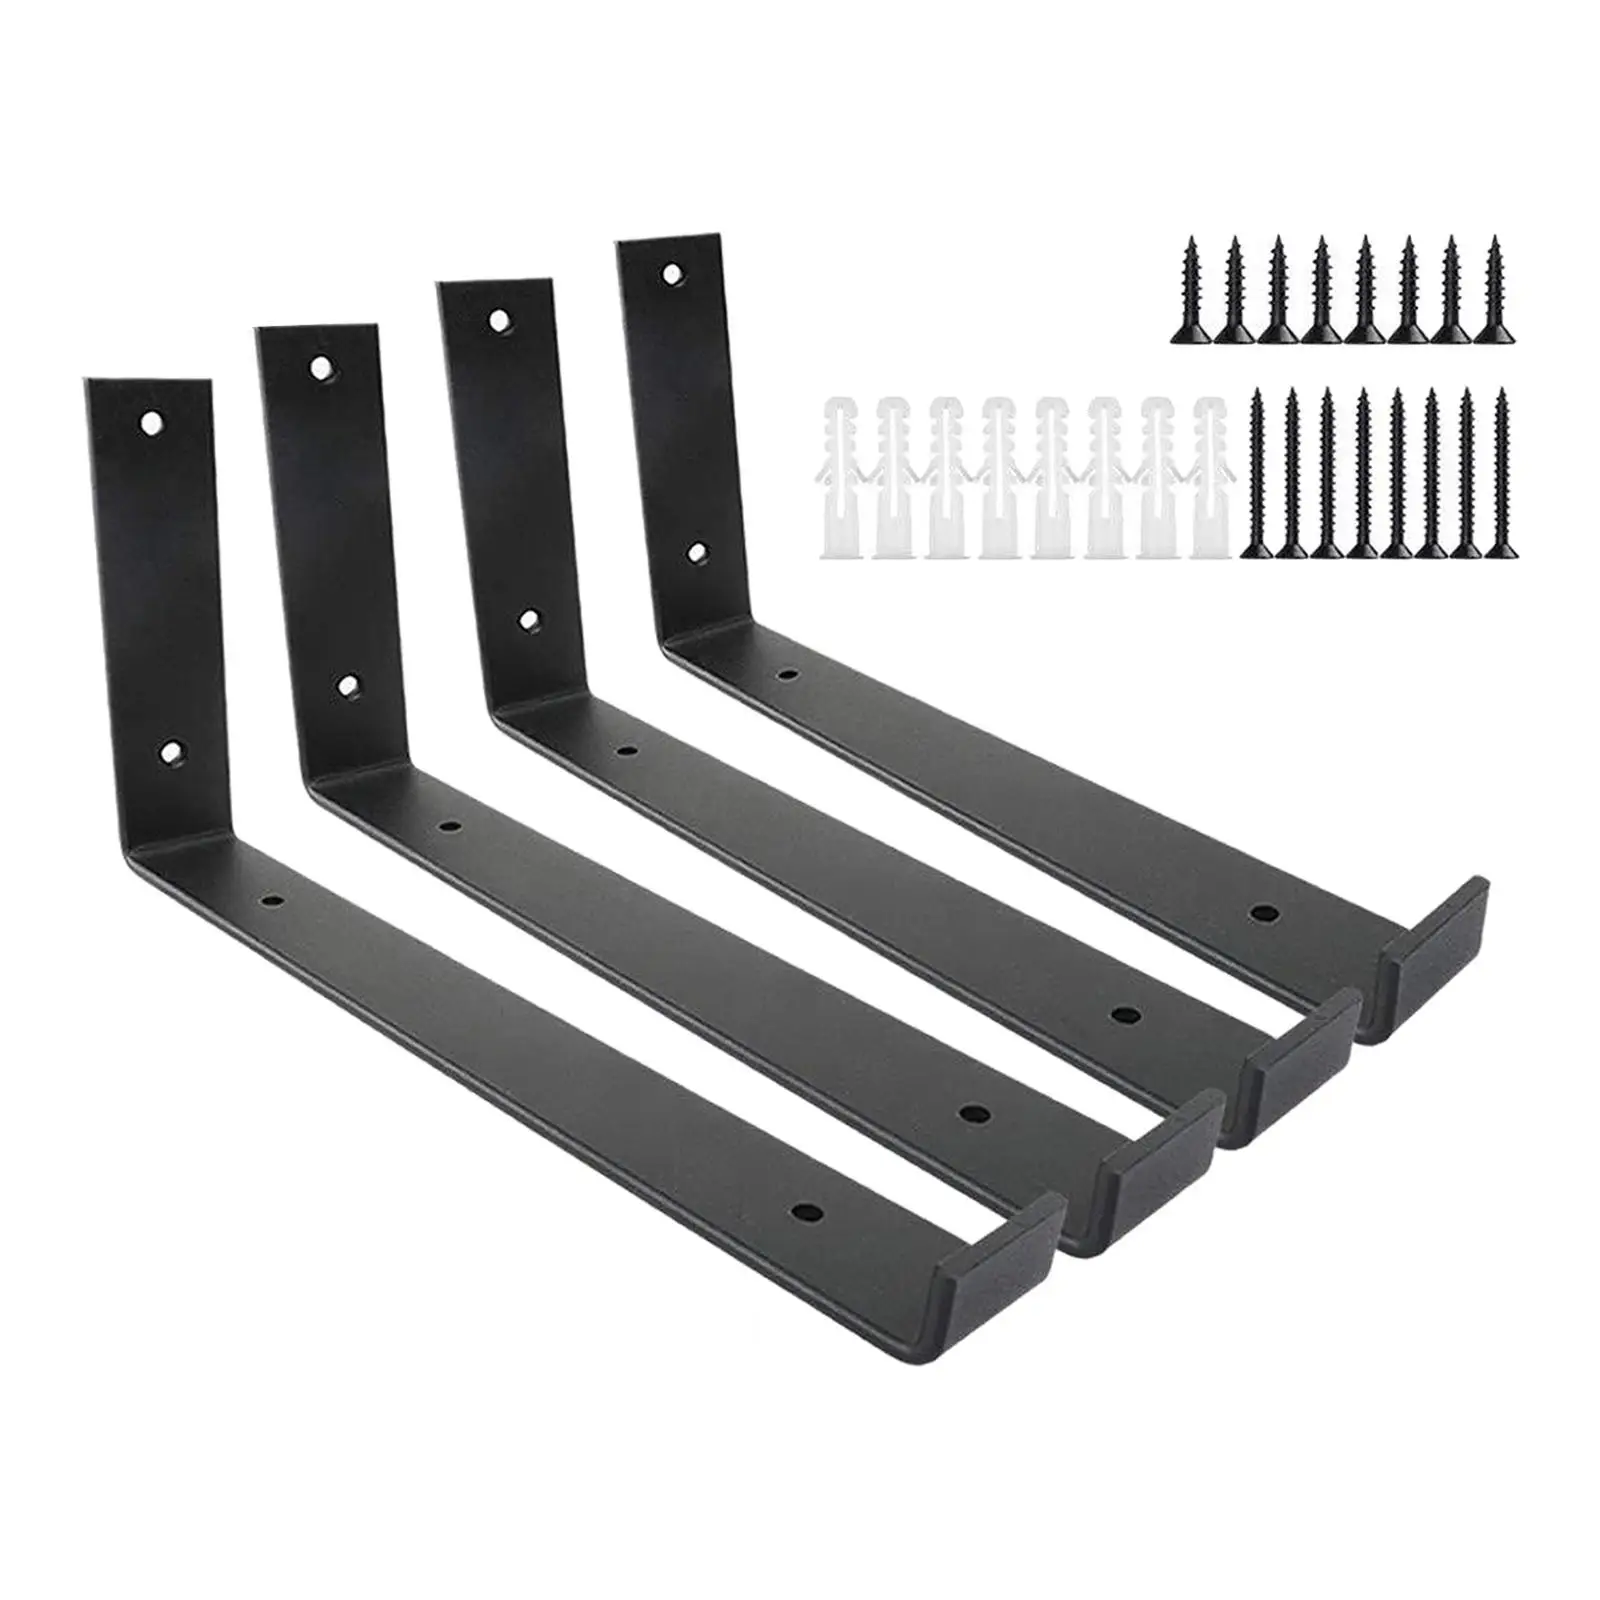 4Pcs Shelf Bracket Thick Heavy Duty Support Storage Metal Floating Shelf Brackets Shelf Supports for Home Office Bookstore Store